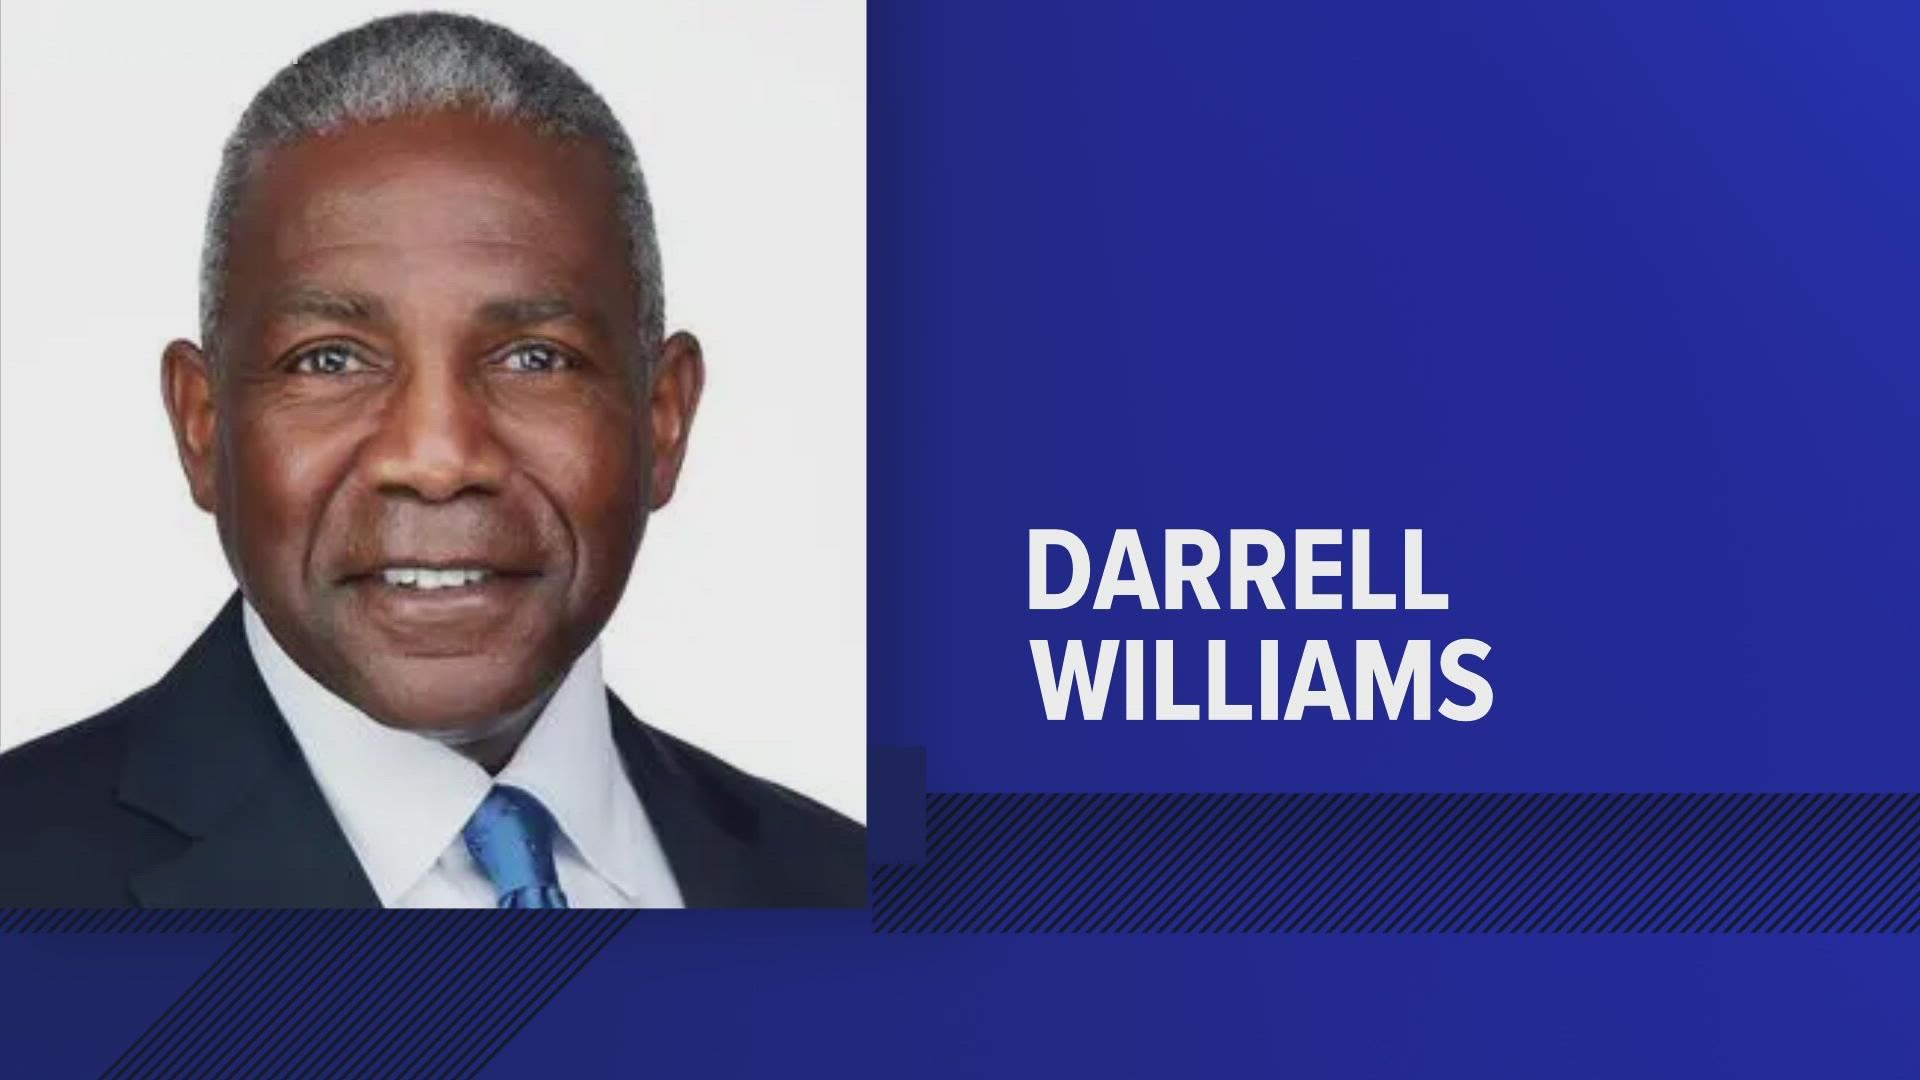 Darrell K. Williams, a retired three-star Army general, started on Friday.